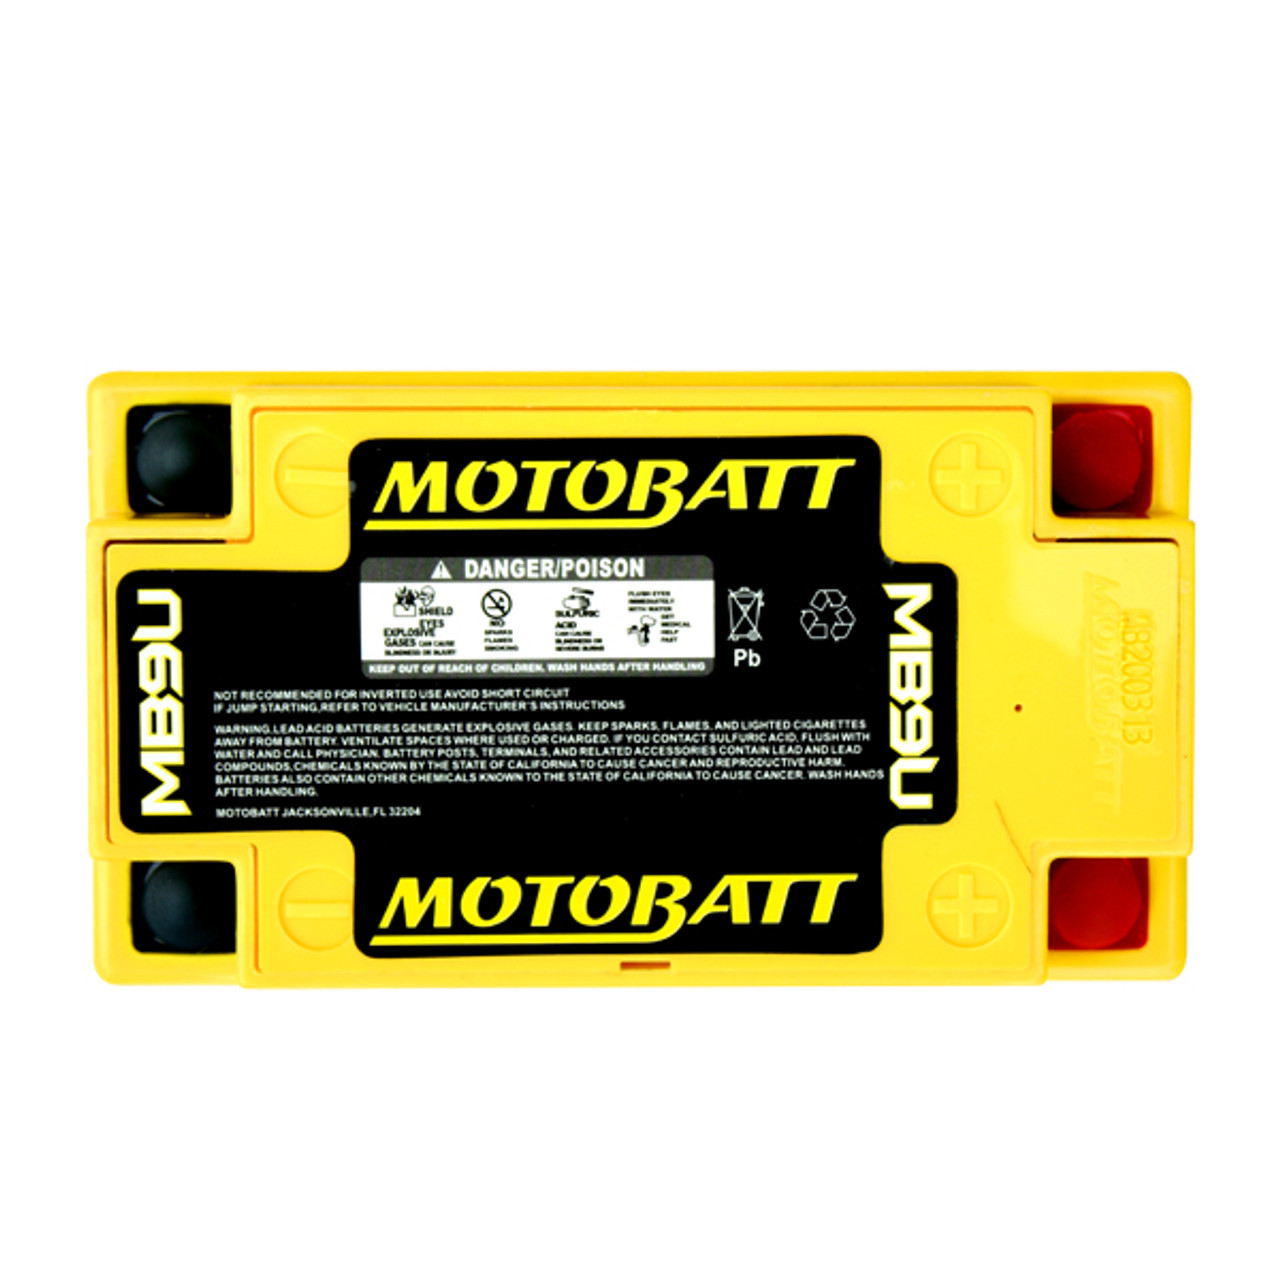 Yuasa 12N9-4B-1 Battery Replacement - AGM Sealed for Motorcycle